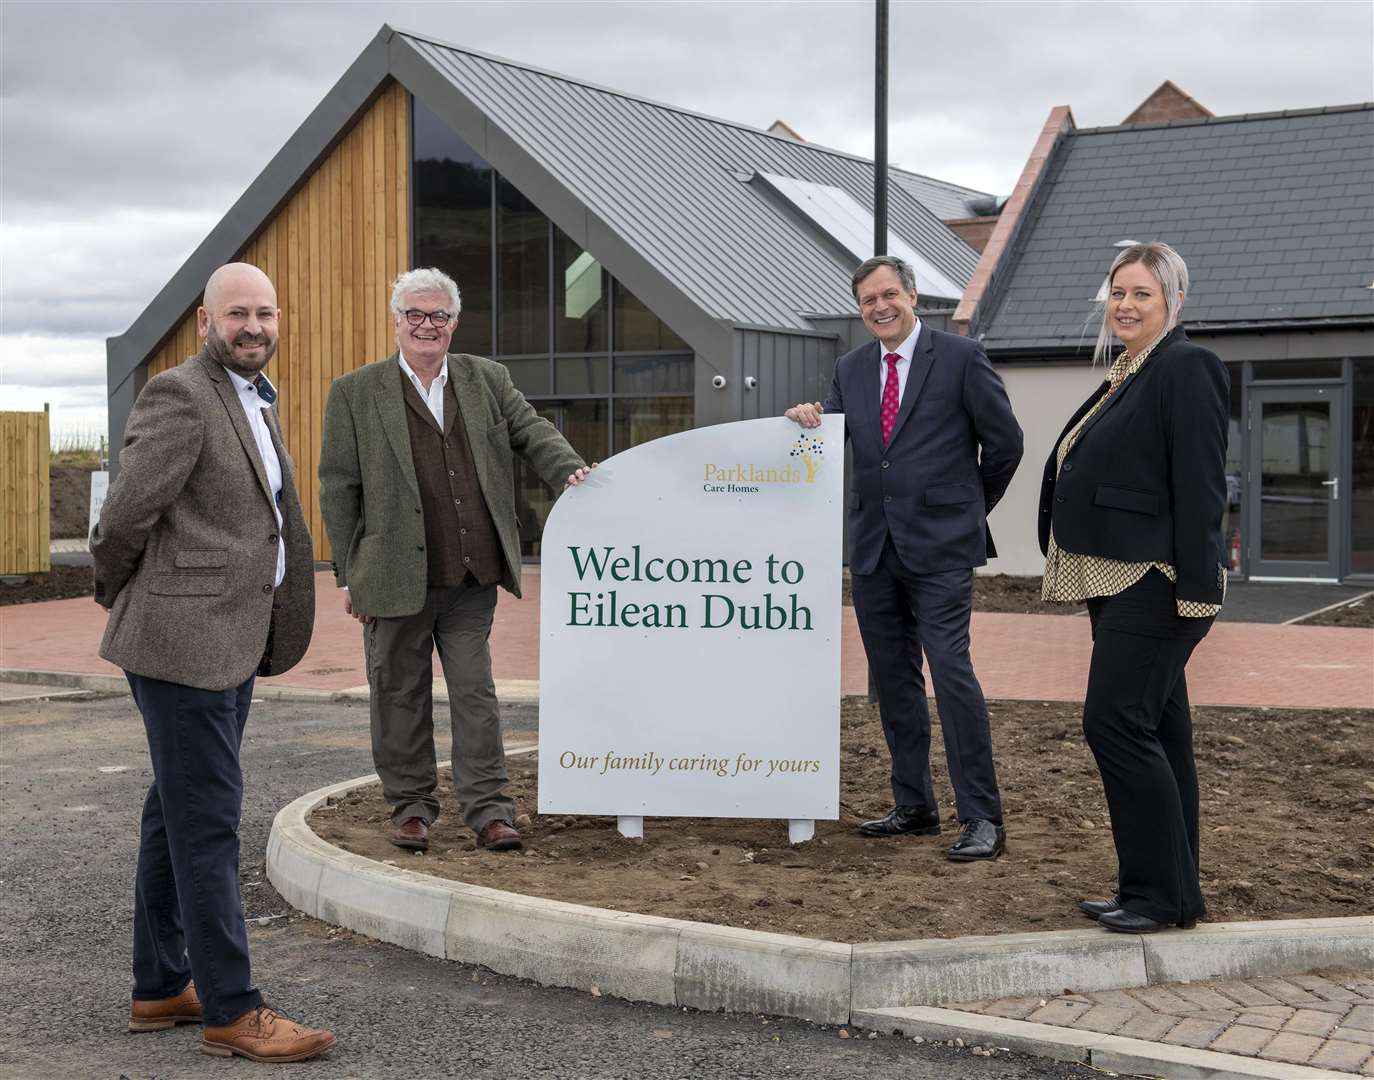 Parklands Care Home's Eilean Dubh in Fortrose. Architect Bryan McFadzean, Black Isle Cares chairman Brian Devlin, managing director Ron Taylor and manager Sharon Reid.